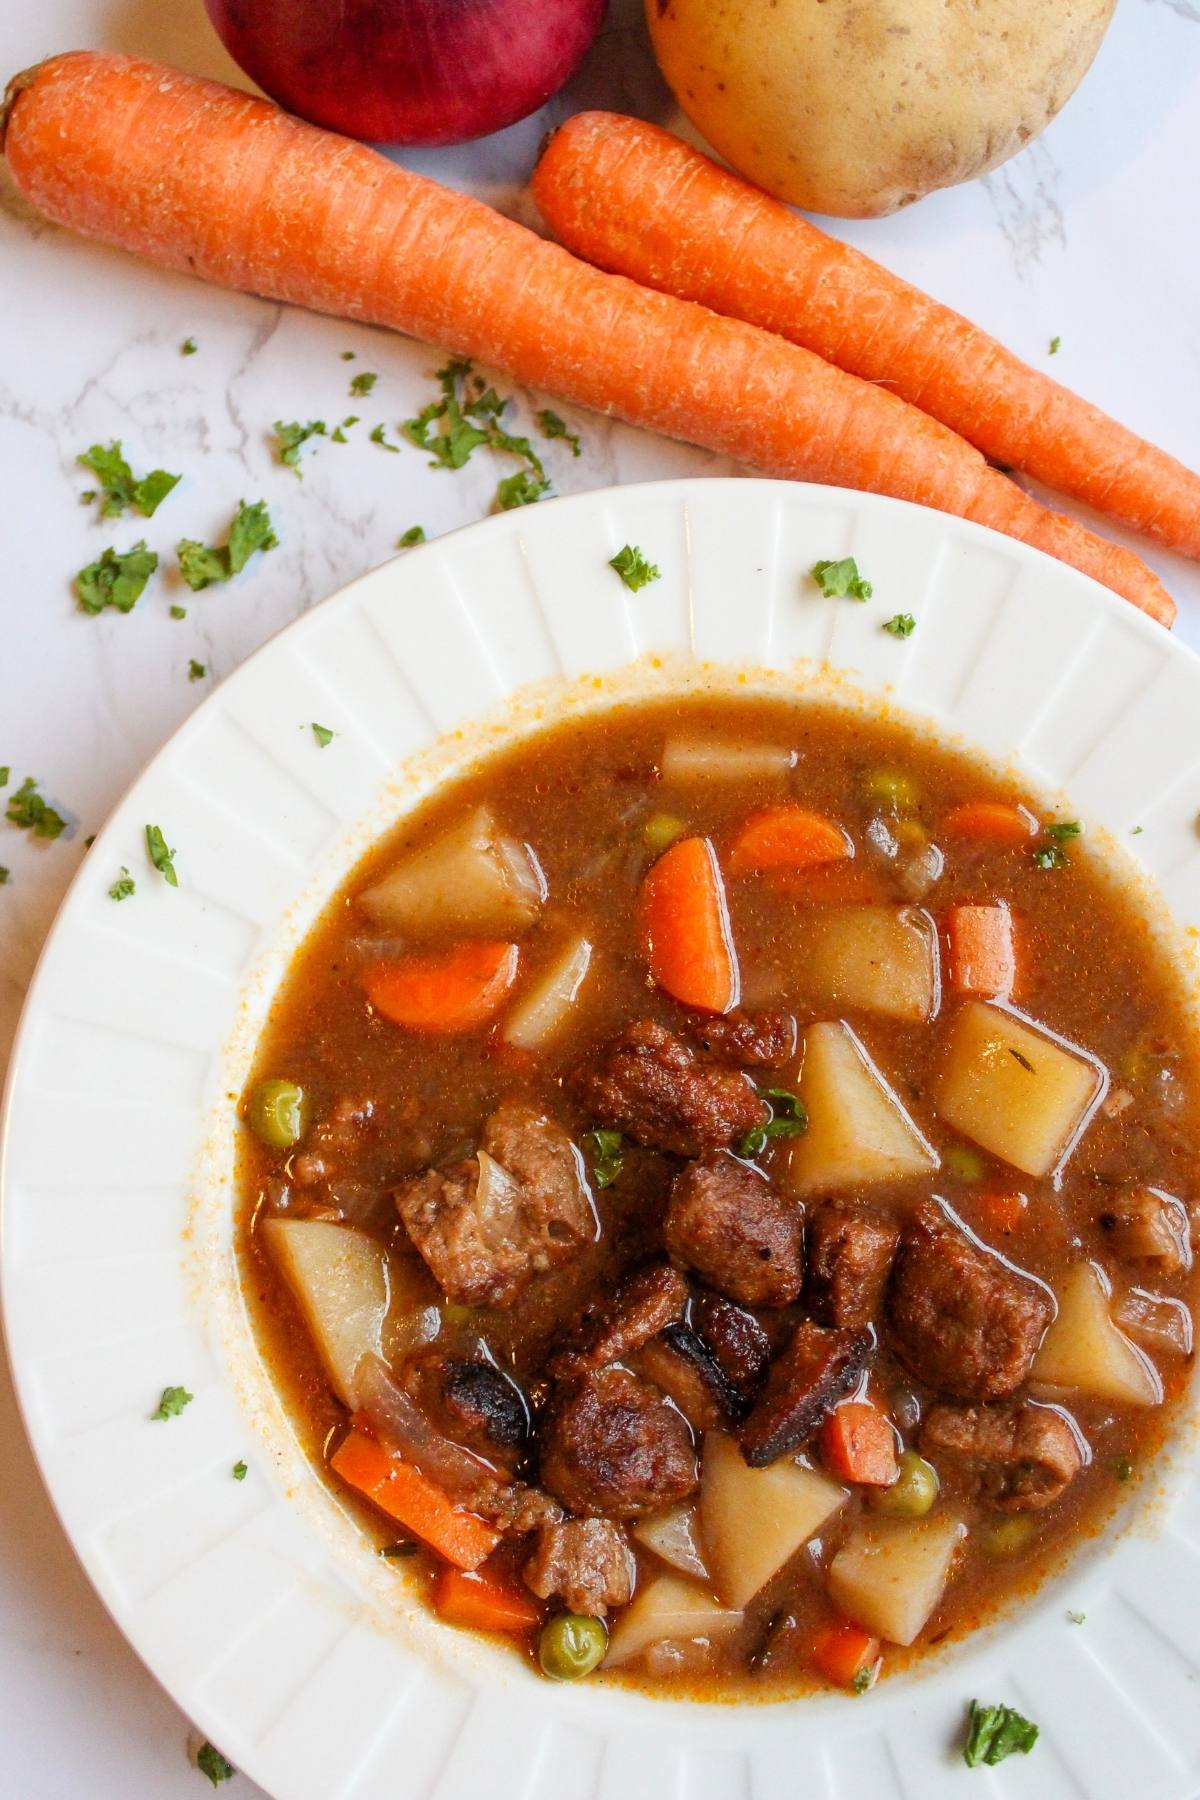 Bowl of vegan beef stew on a table with carrots.